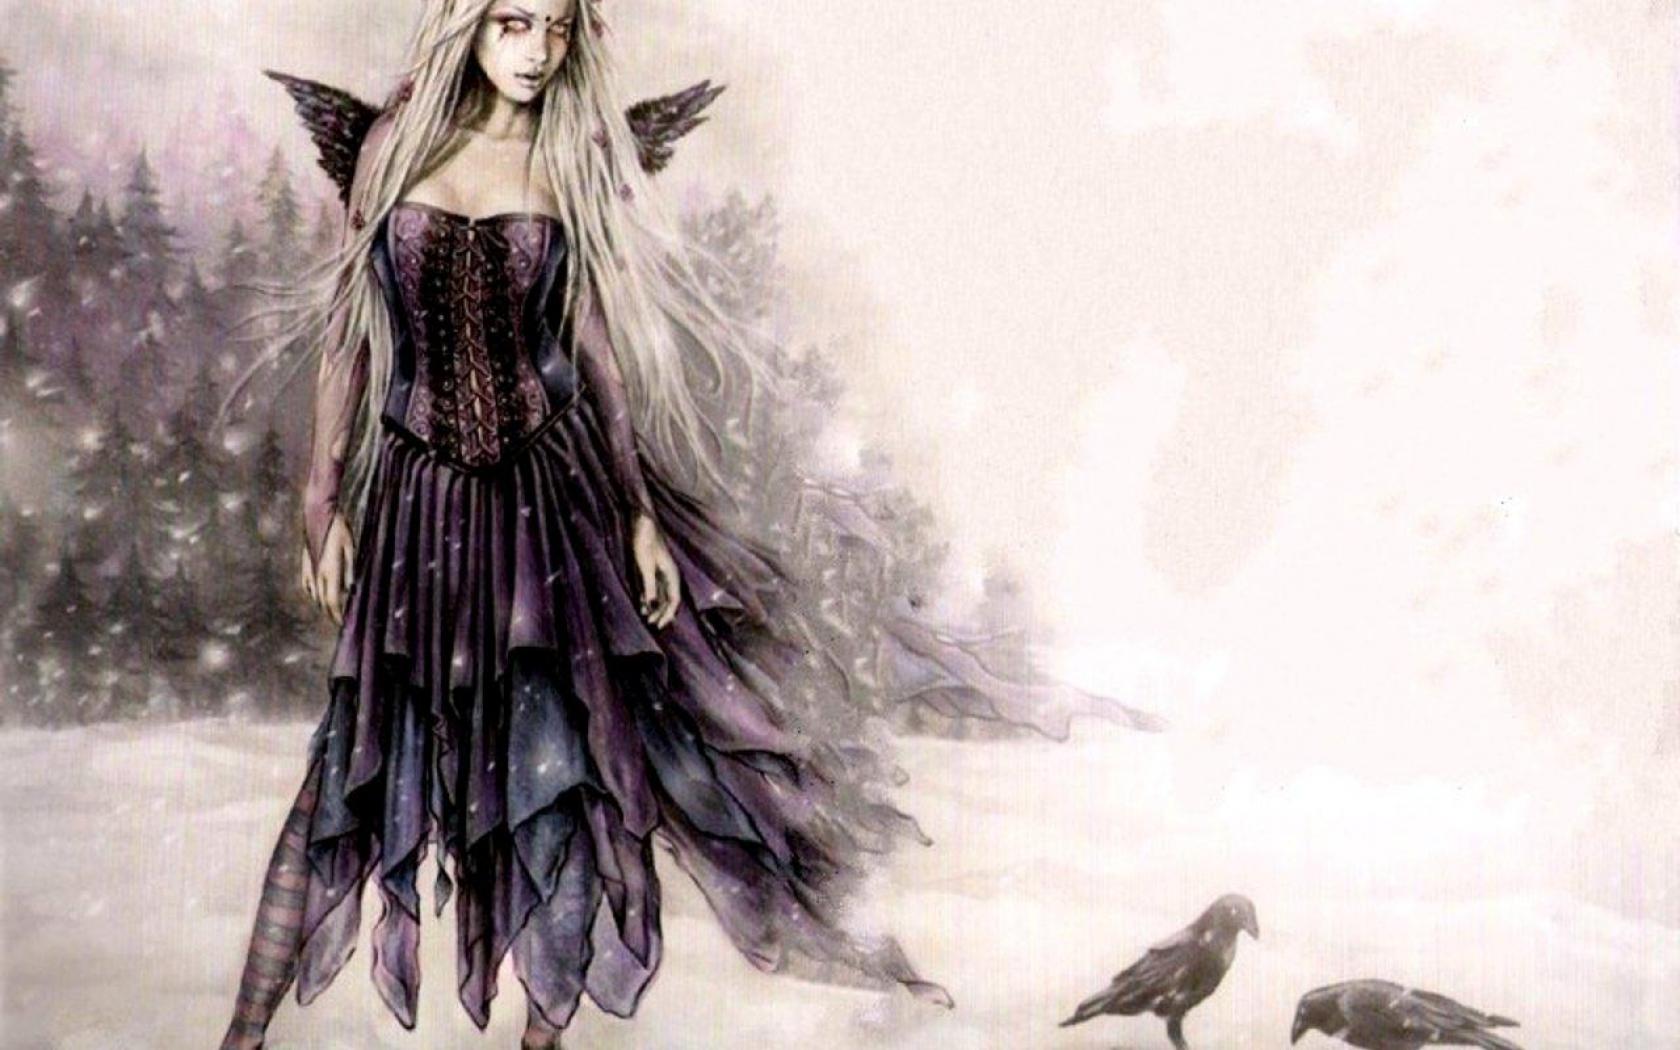 GOTHIC ANGEL WALLPAPER - HD Wallpapers